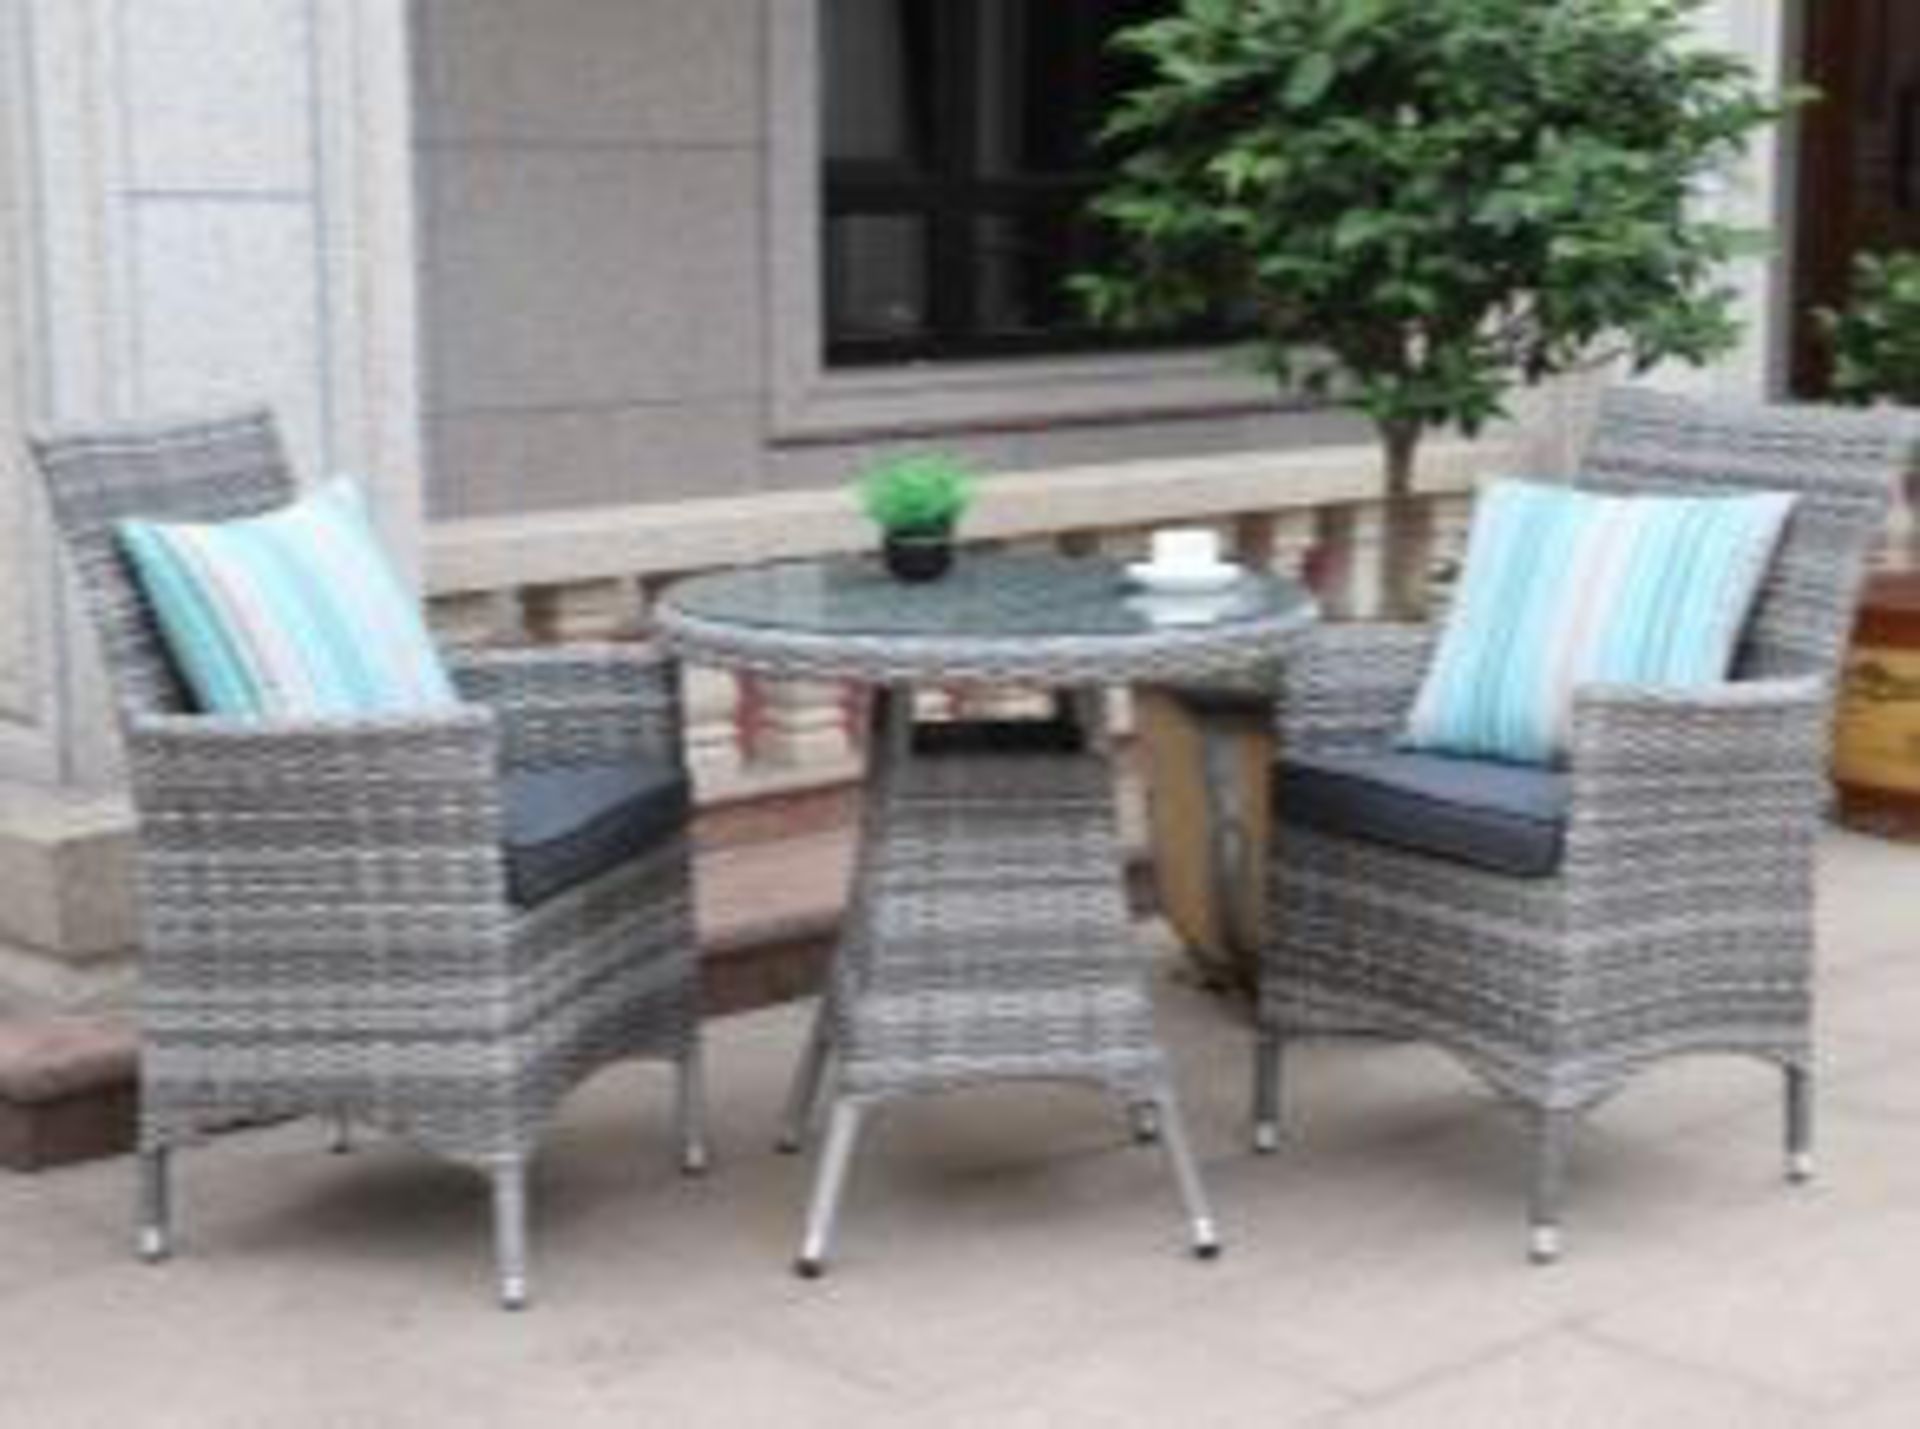 + VAT Brand New Chelsea Garden Company Two Person Table & Chair Set - Aluminium Frame - Double 1/2